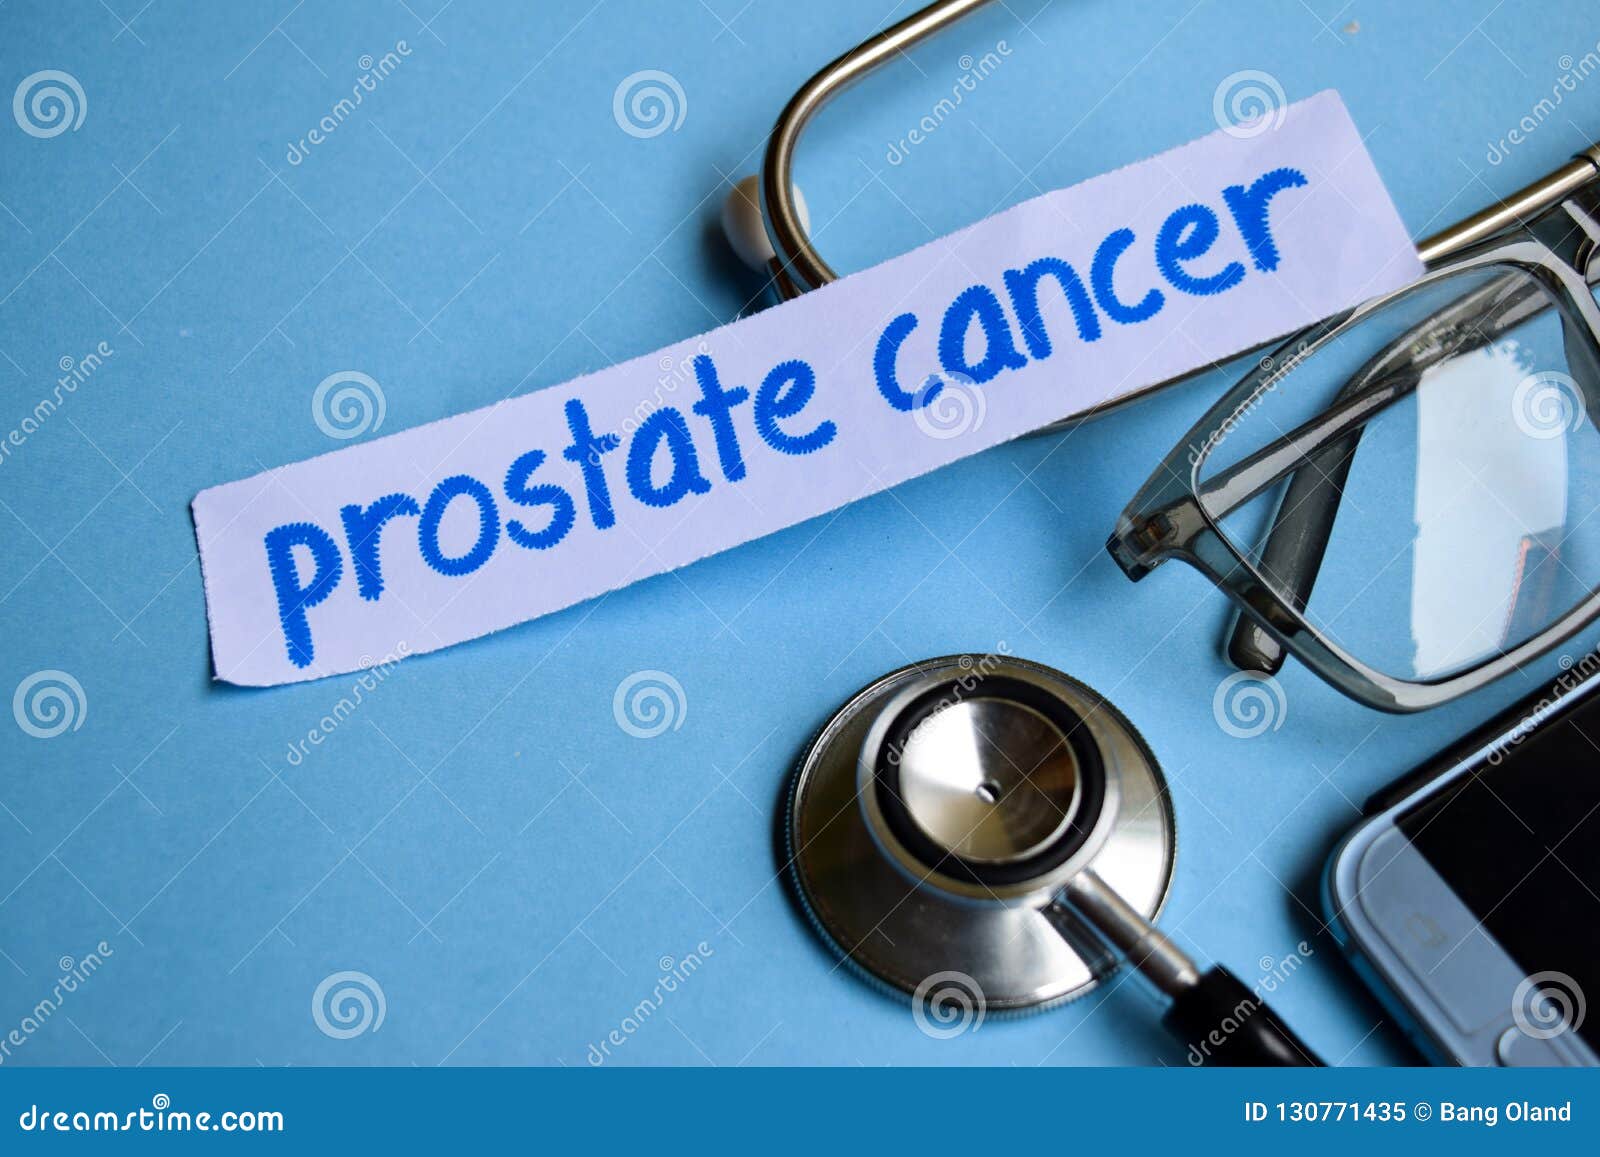 Prostate Cancer Inscription With The View Of Stethoscope Eyeglasses